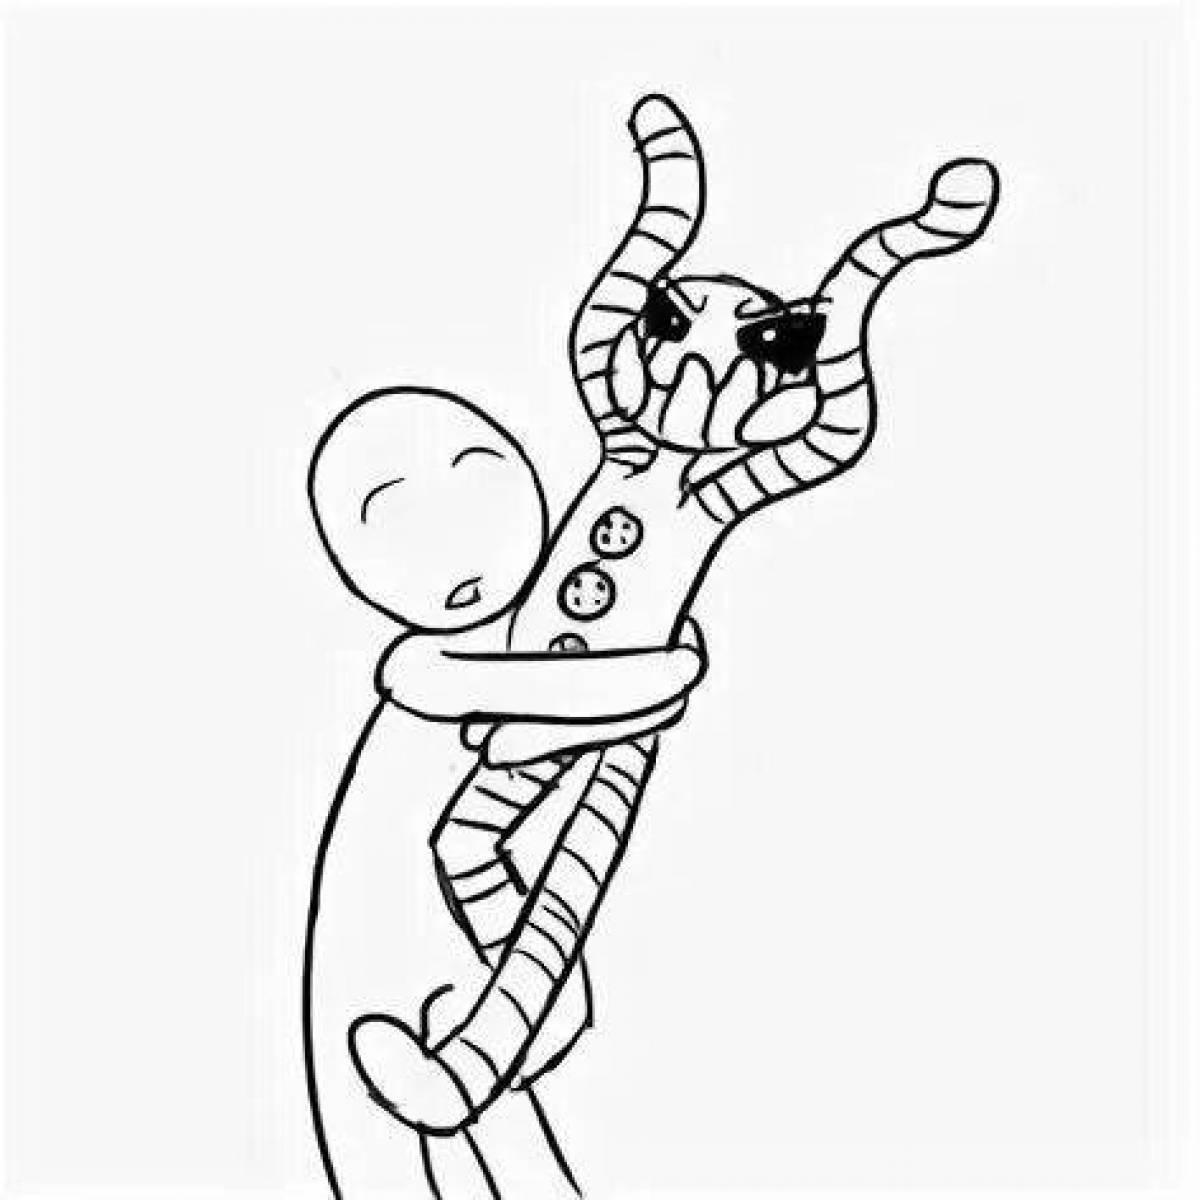 Grand puppet fnaf coloring page